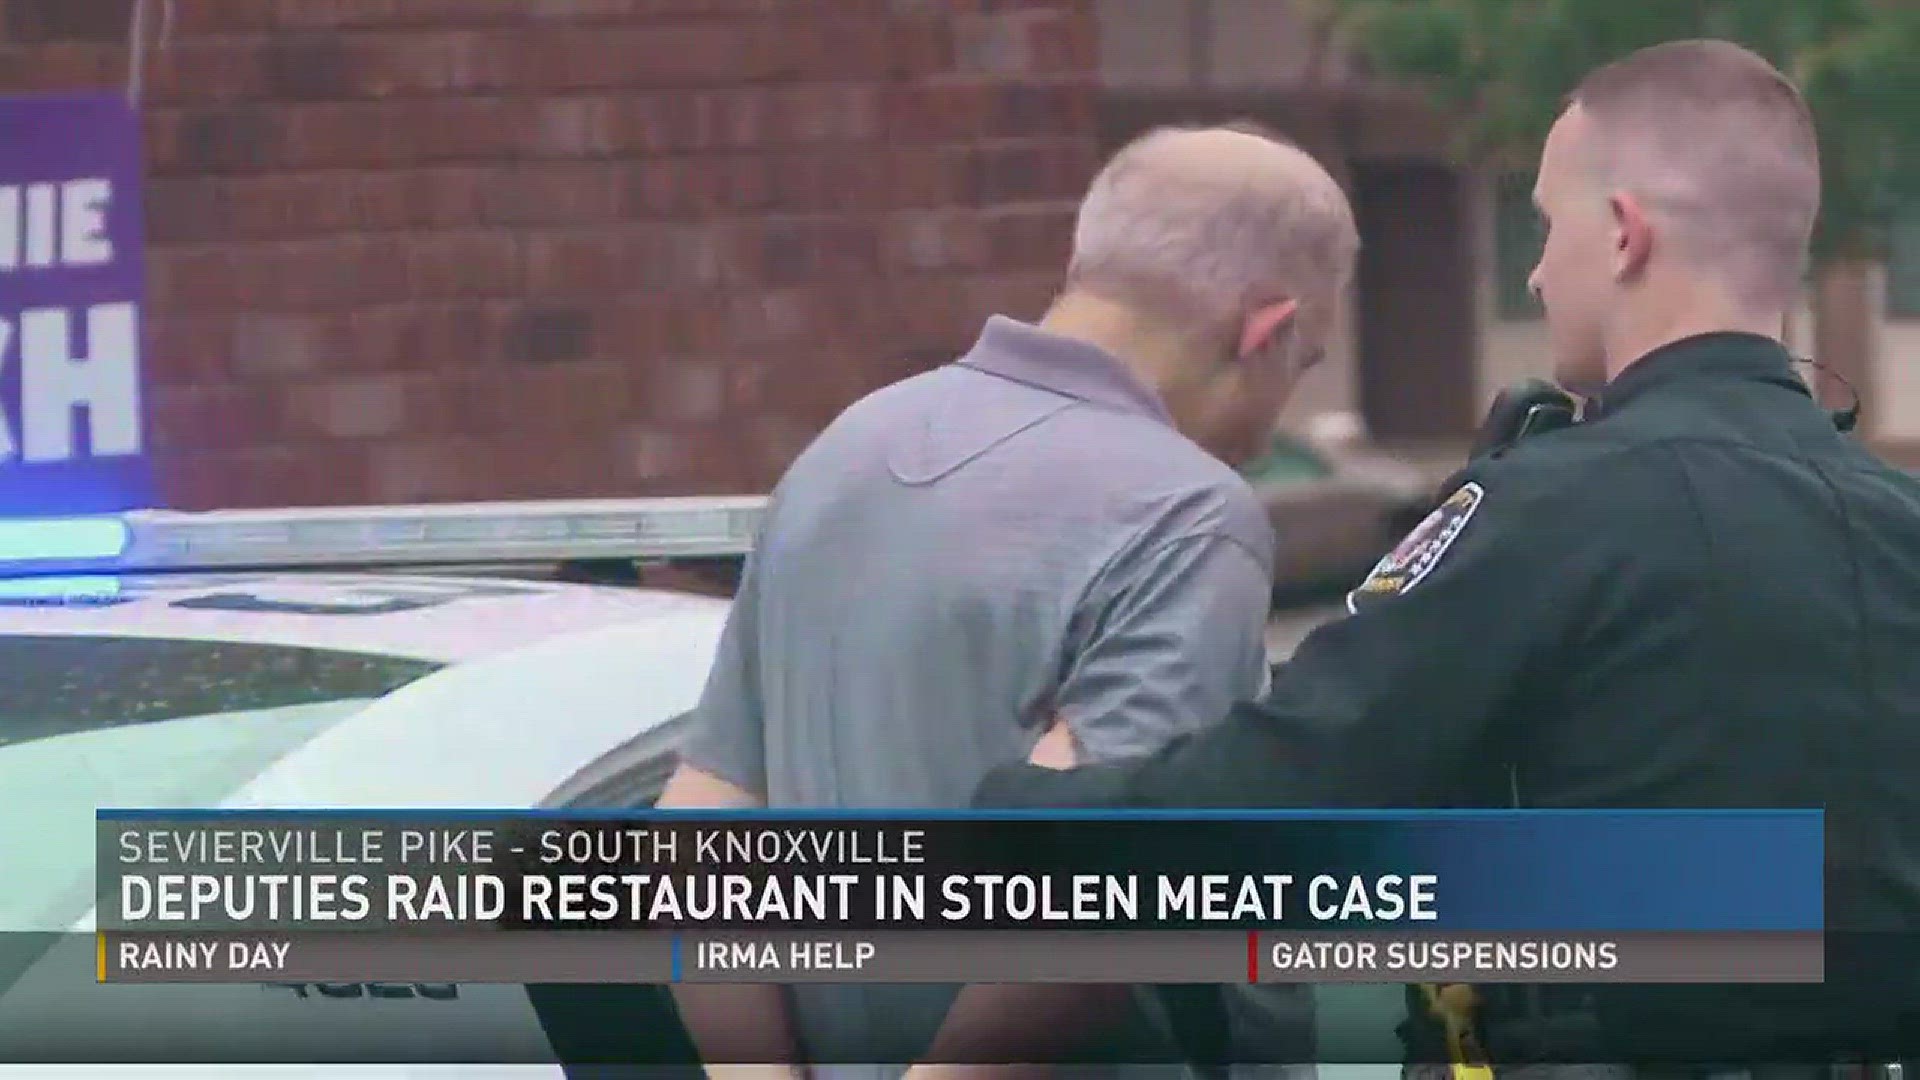 Sept. 13, 2017: Knox County deputies raided a South Knoxville restaurant and arrested the owner in an alleged stolen meat case.